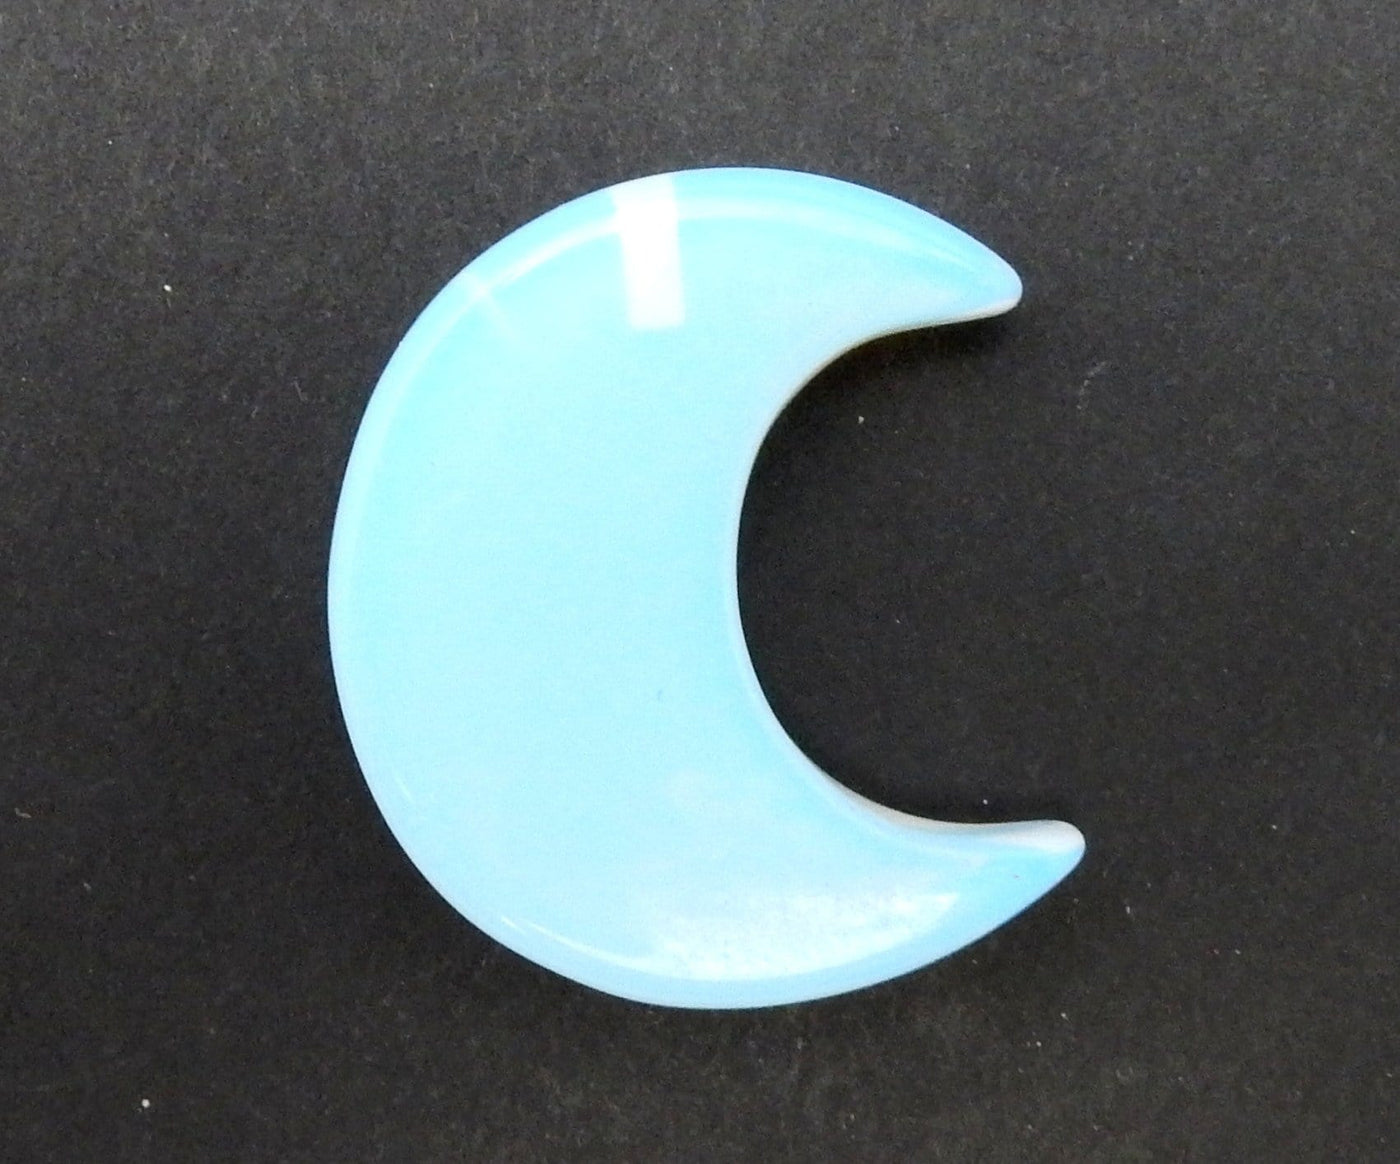 Opalite Half Crescent Moon - Drilled displayed on a black surface.